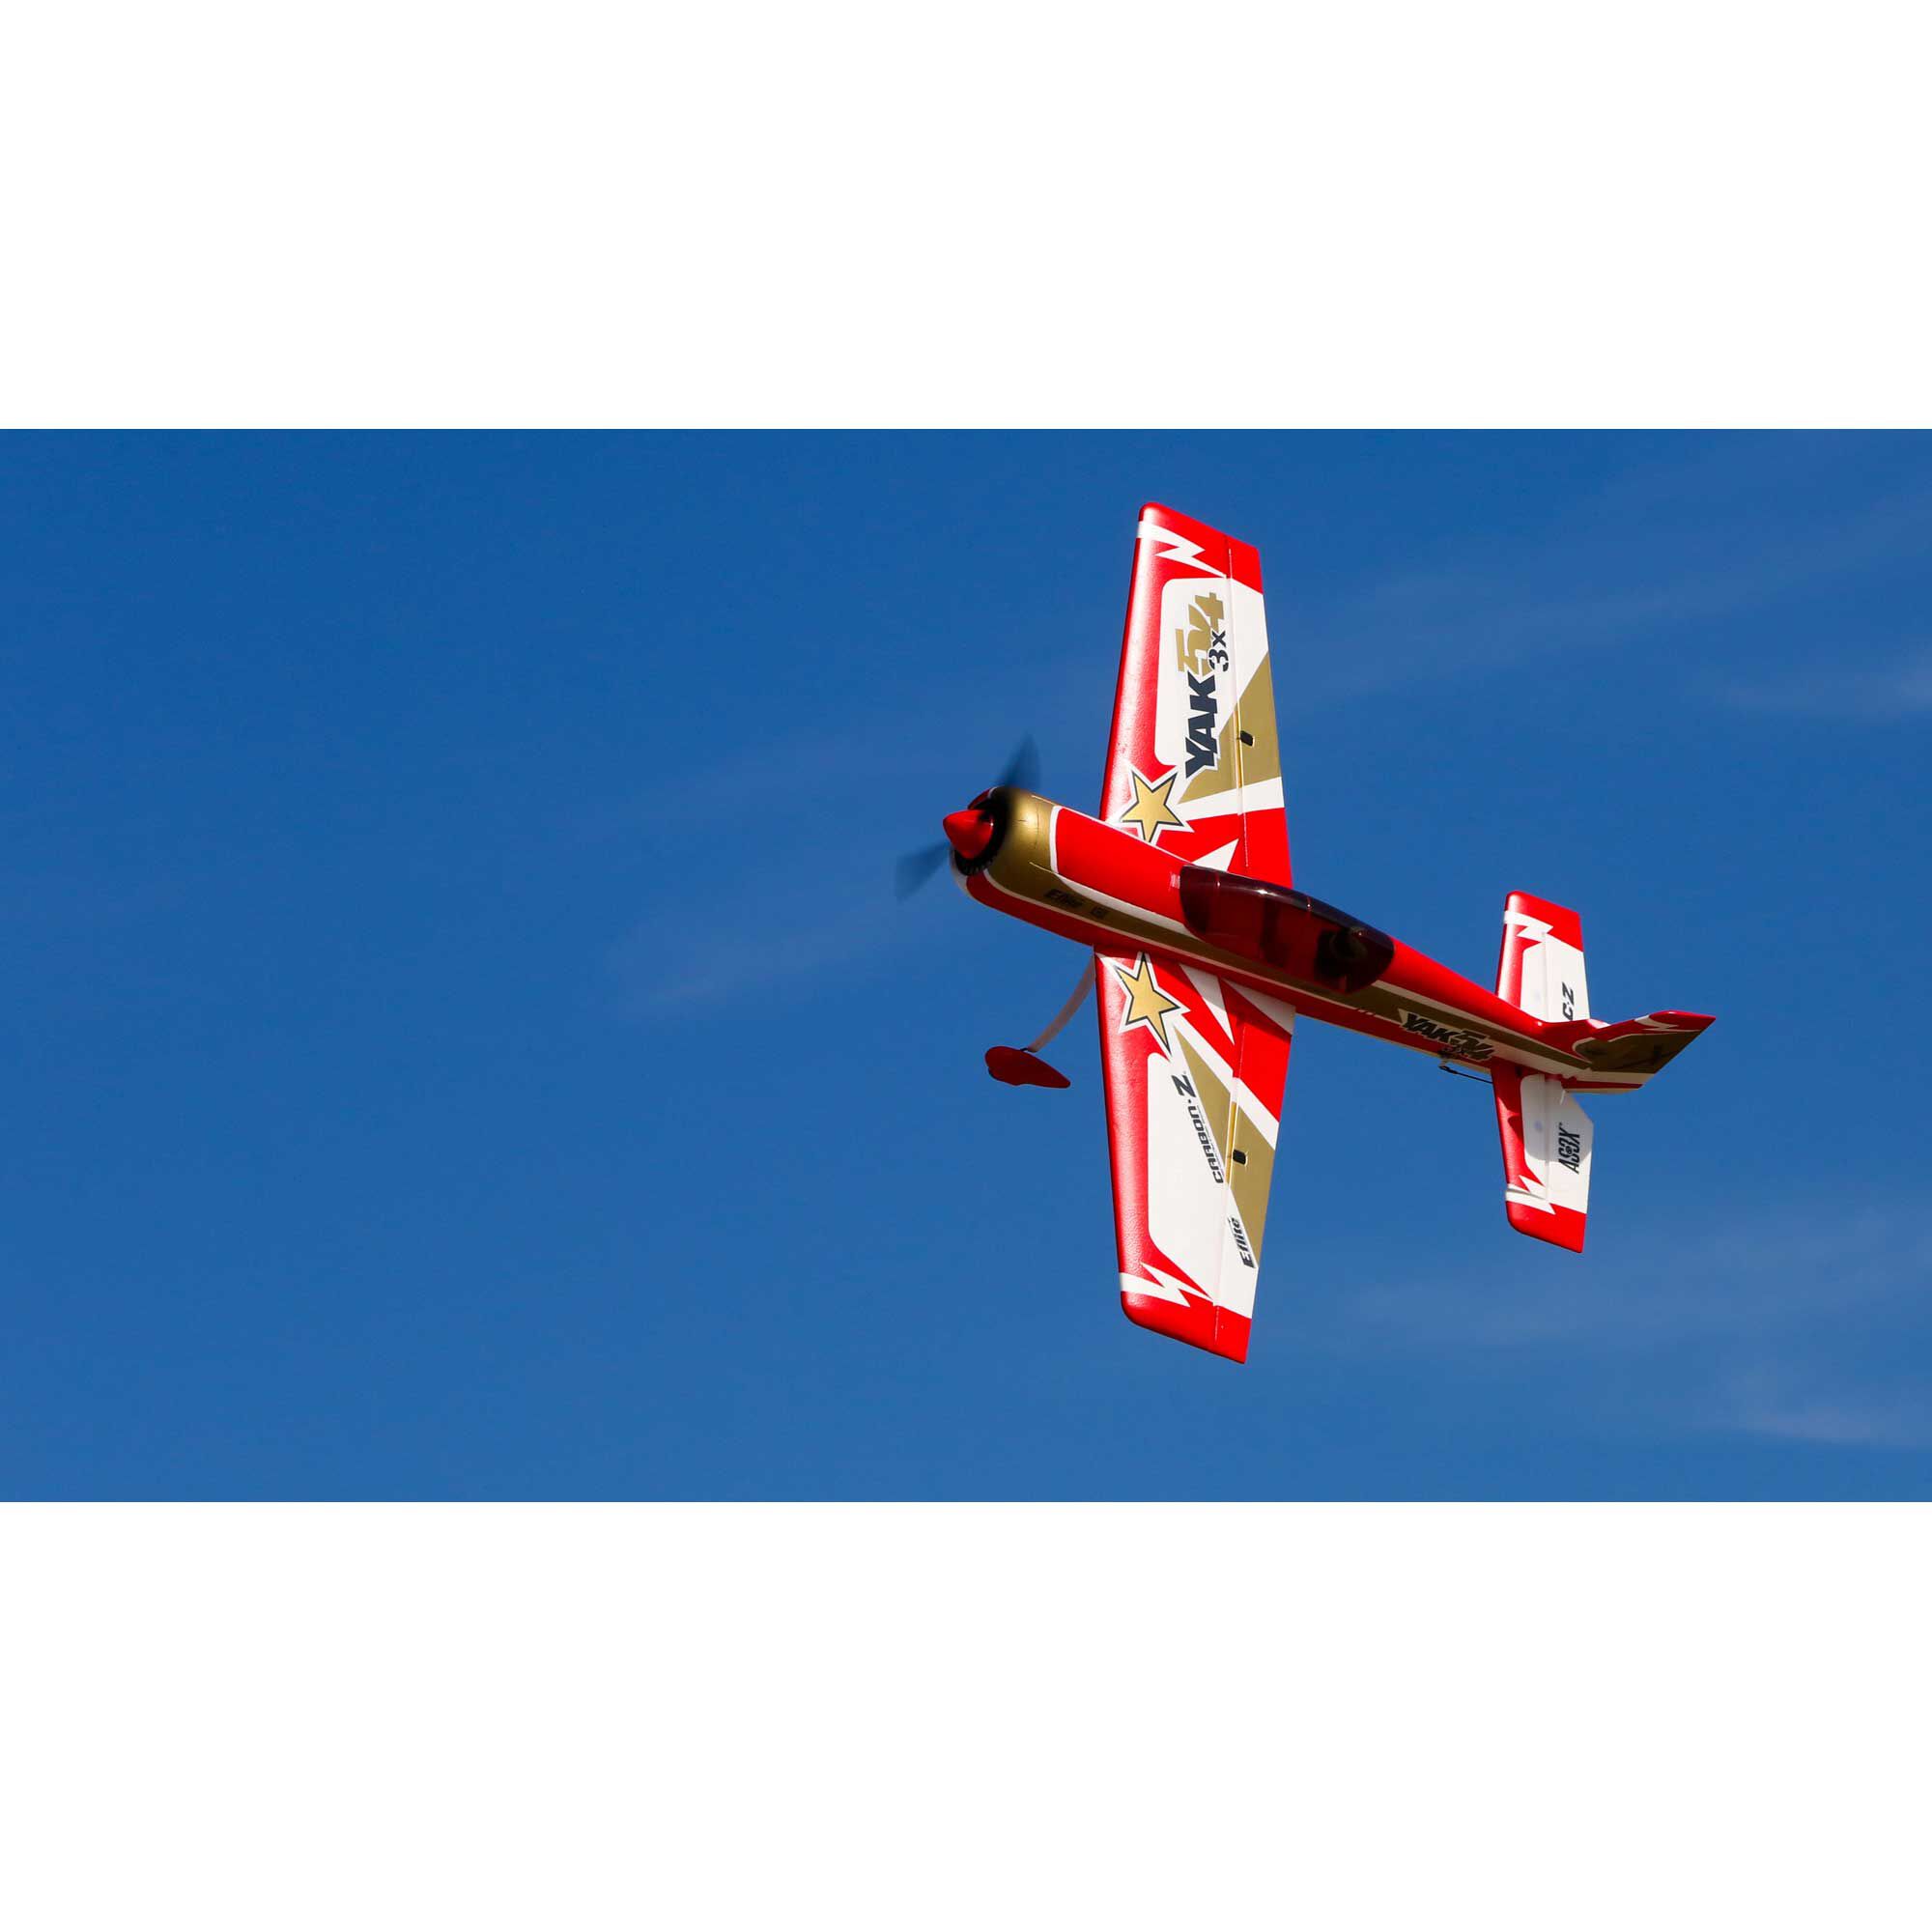 E-flite Carbon-Z Yak 54 3X BNF Basic with AS3X Technology 